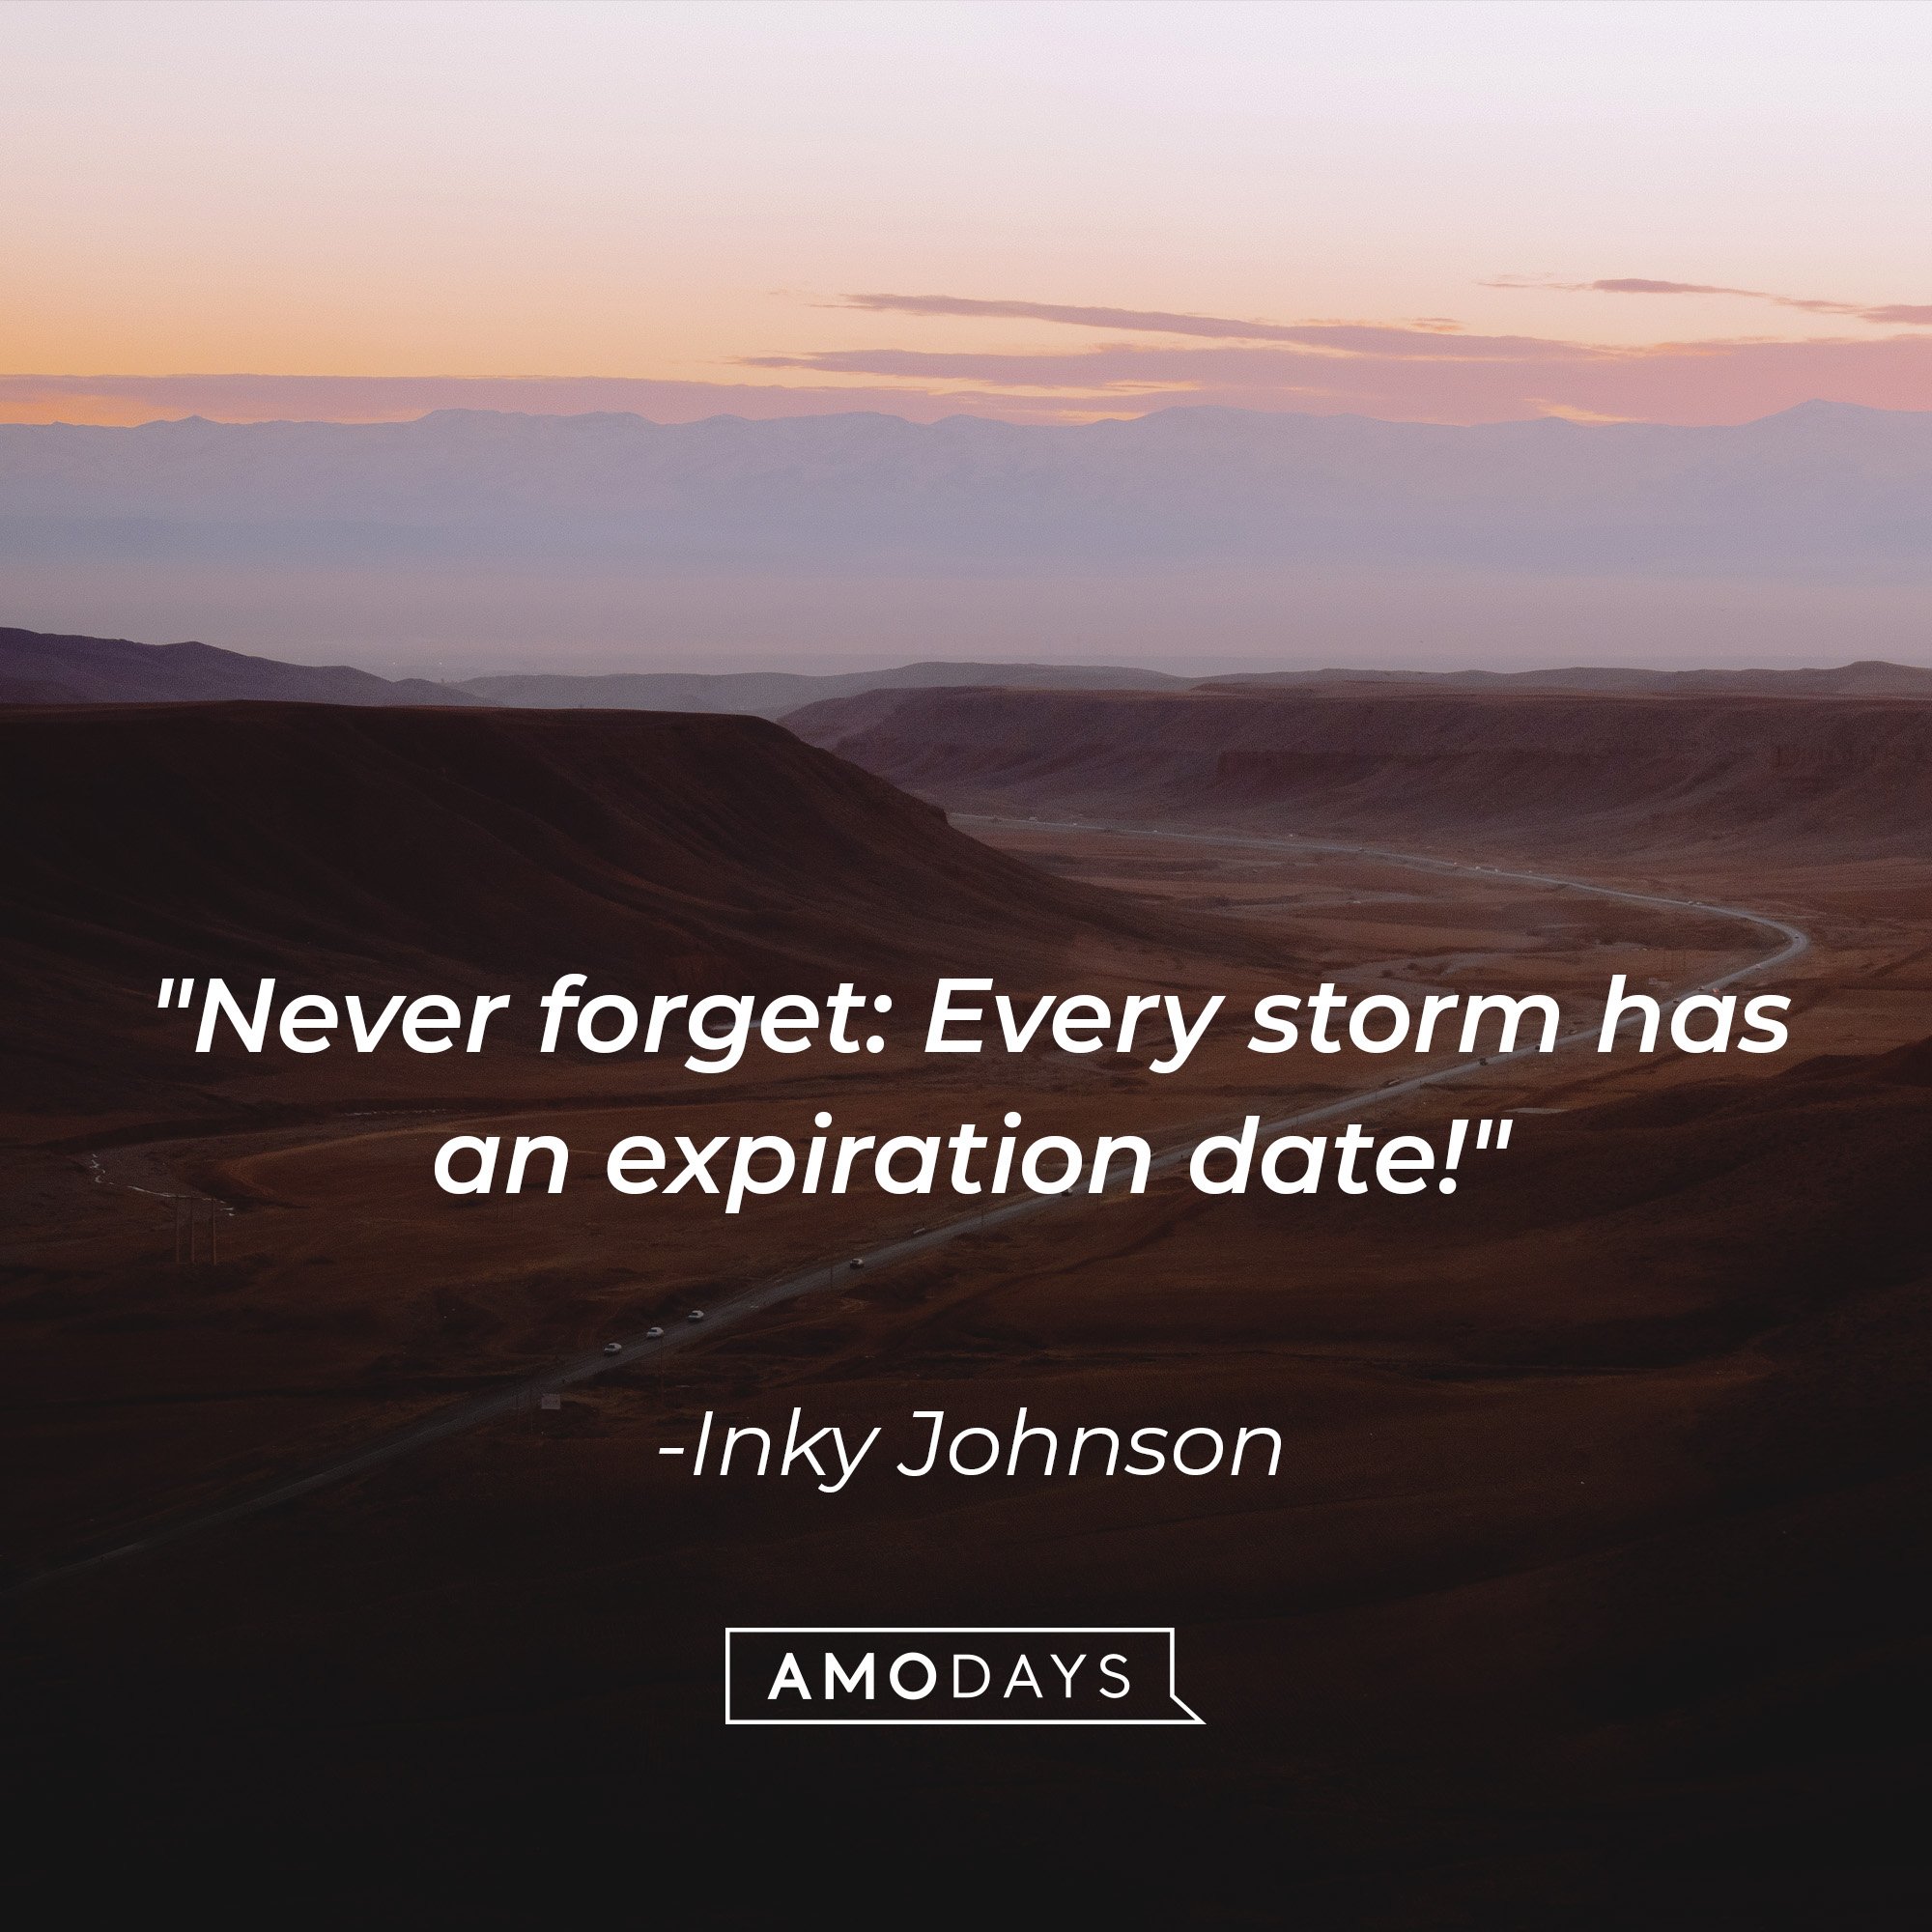 Inky Johnson's quote: "Never forget: Every storm has an expiration date!"  | Image: AmoDays